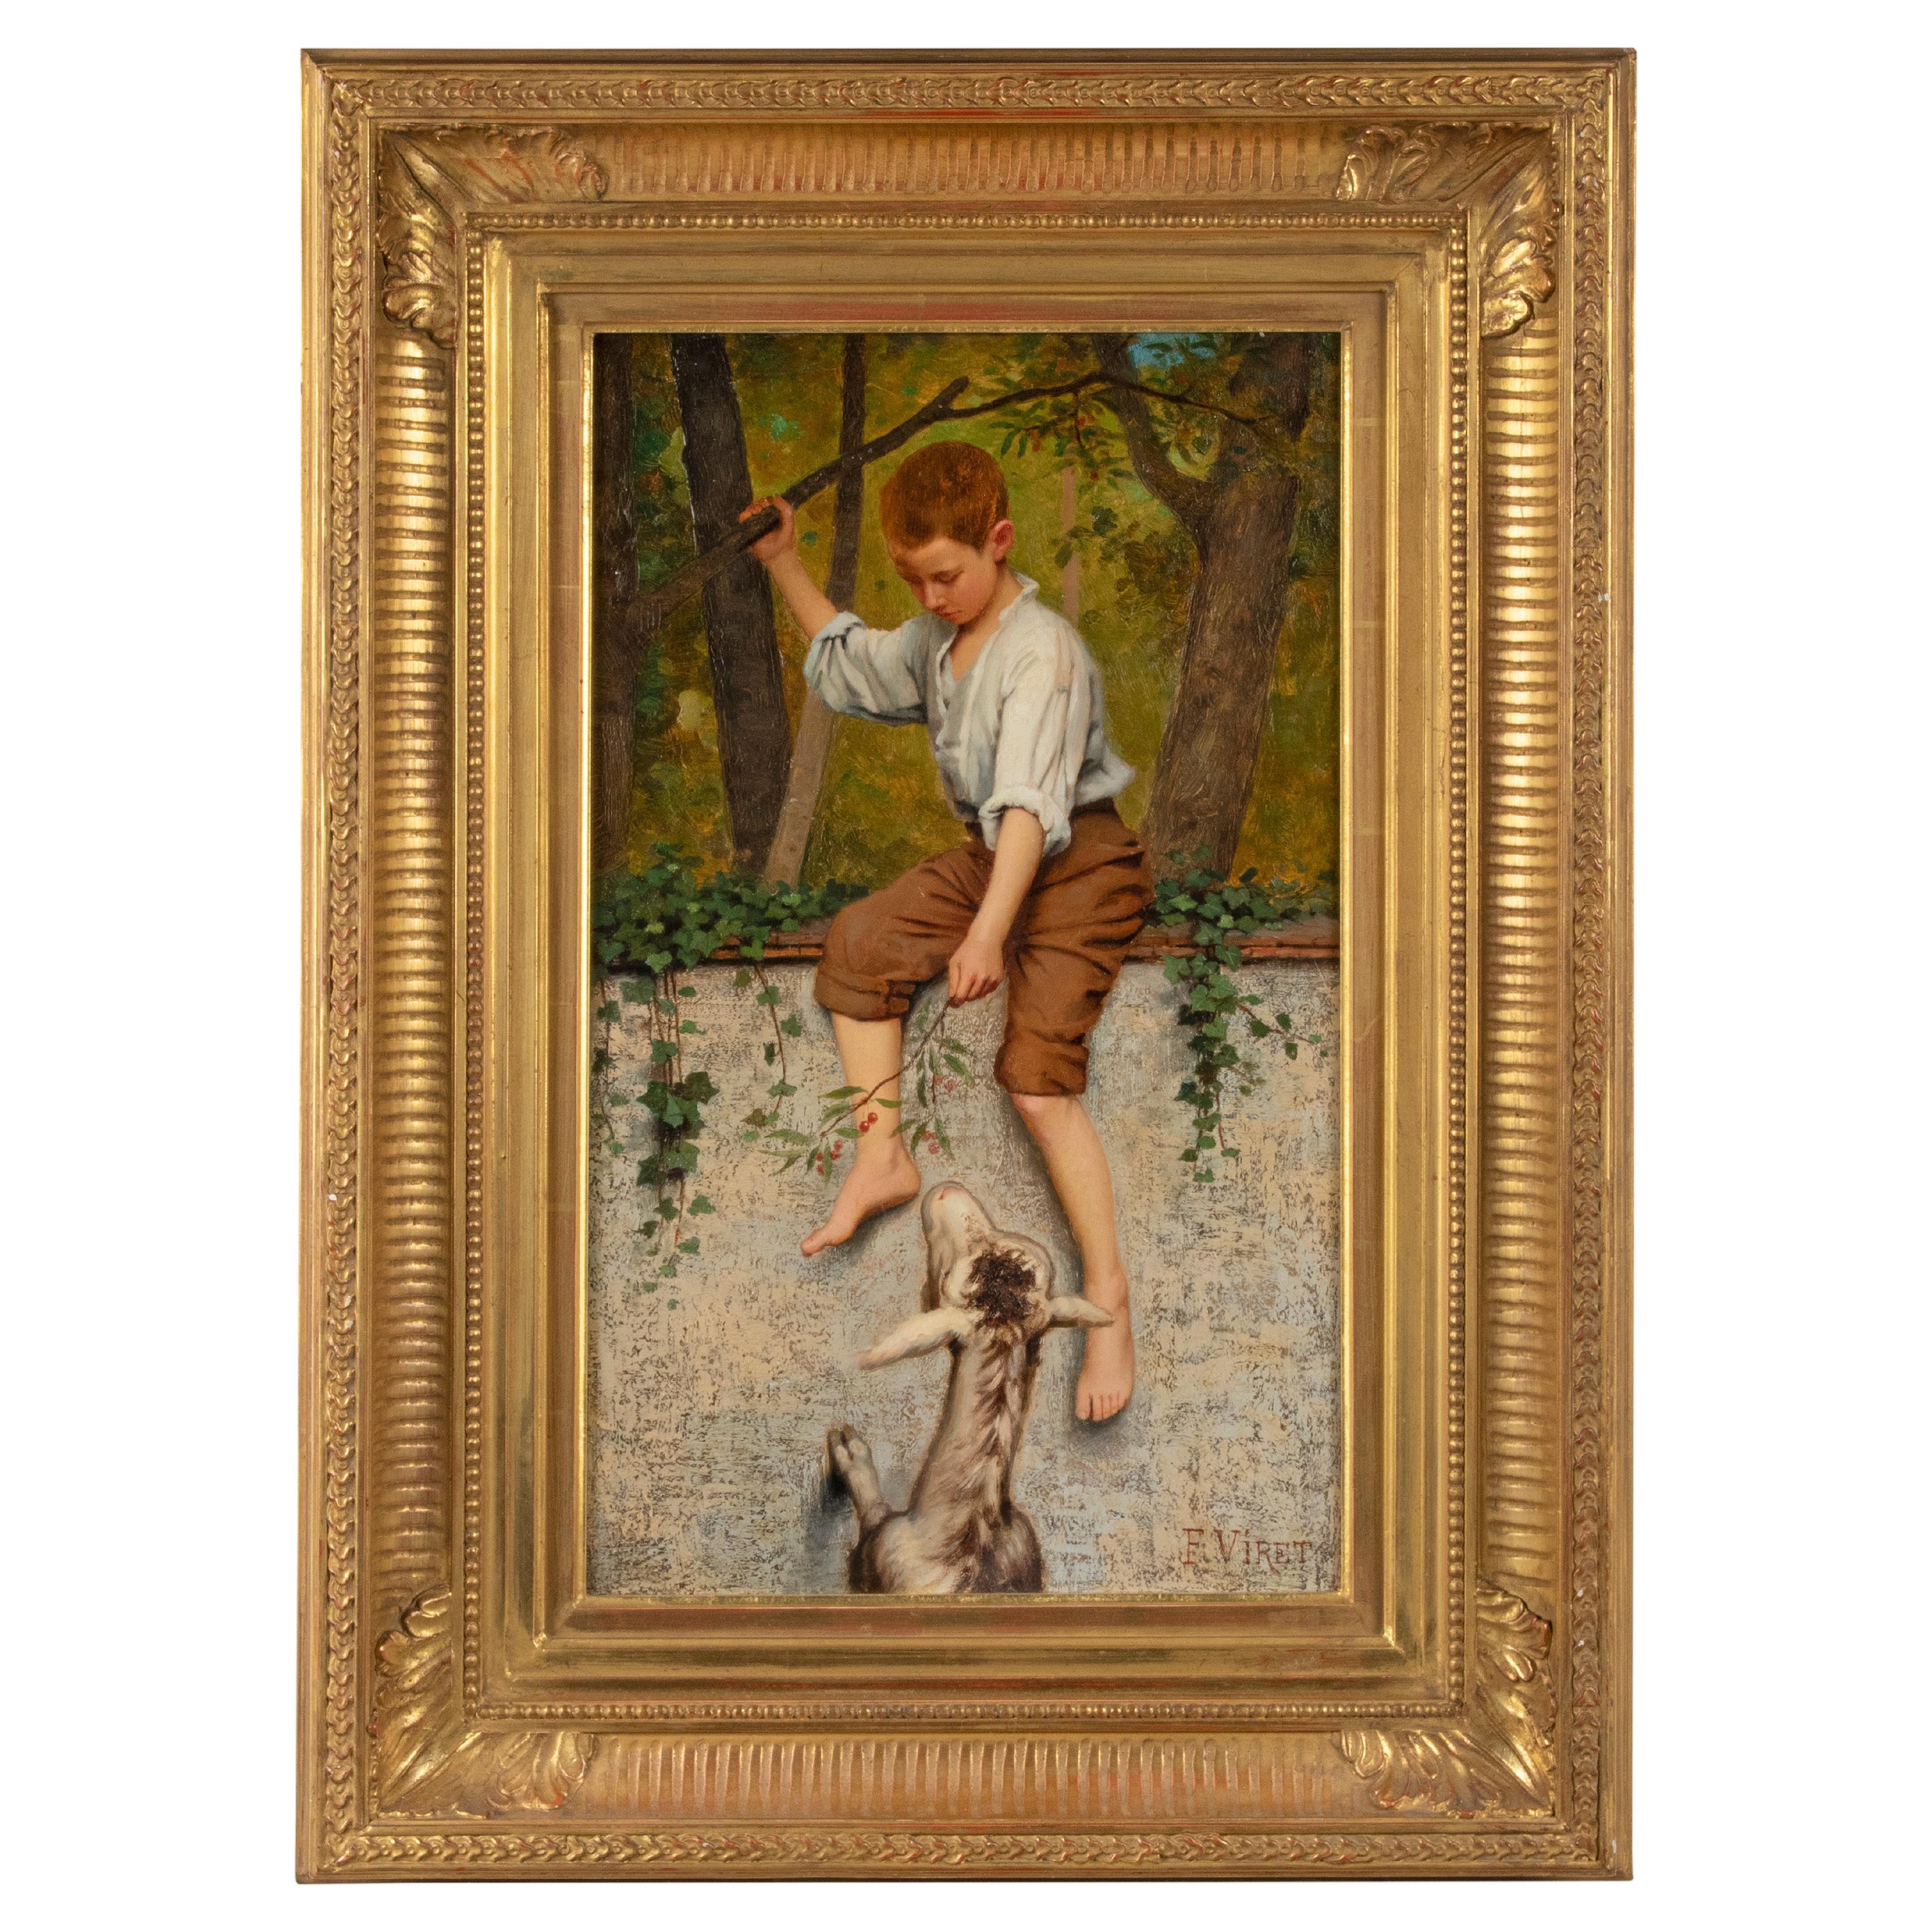 Late 19th Century Oil Painting Young Boy with a Goat by Frédéric Viret